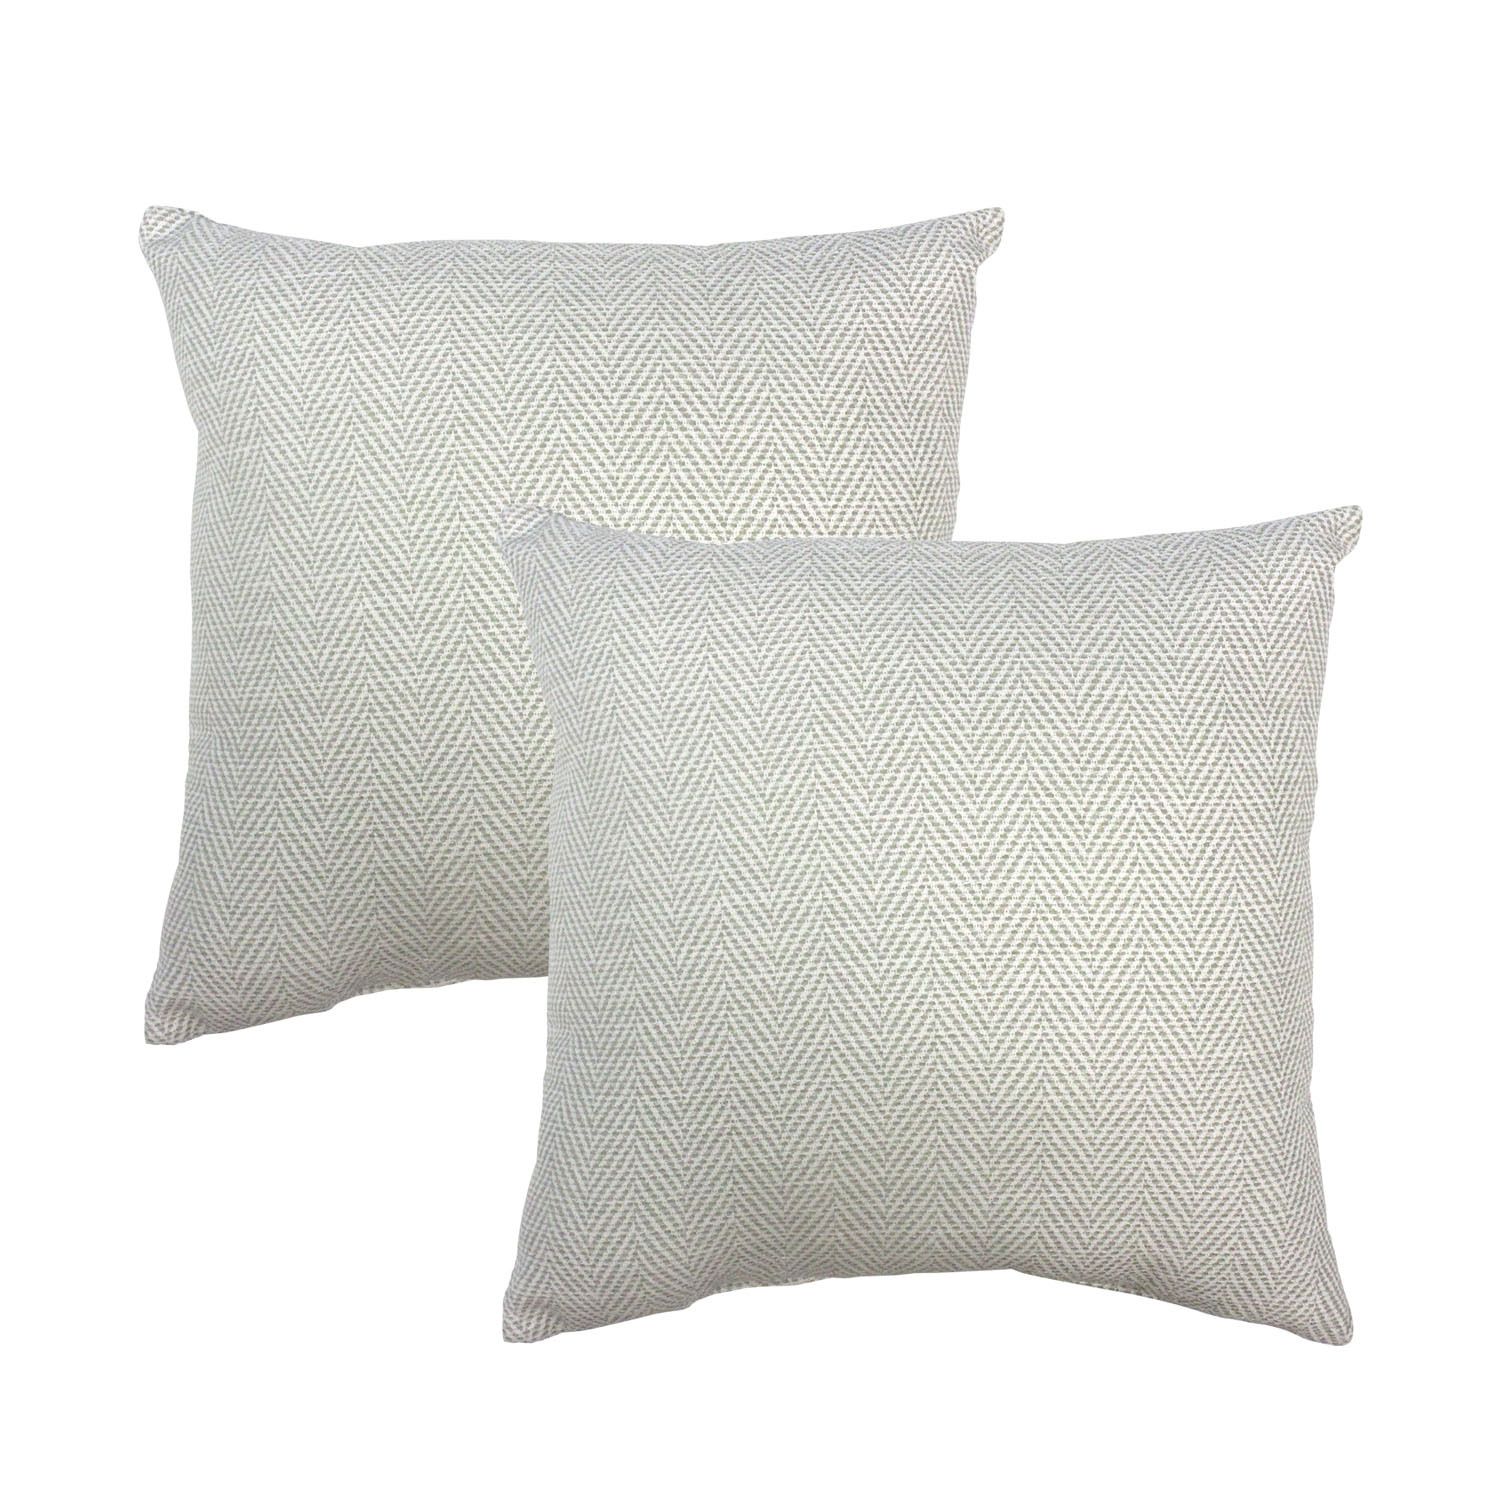 Image for HFI Herring Row Chenille 2-piece Throw Pillow Set at Kohl's.